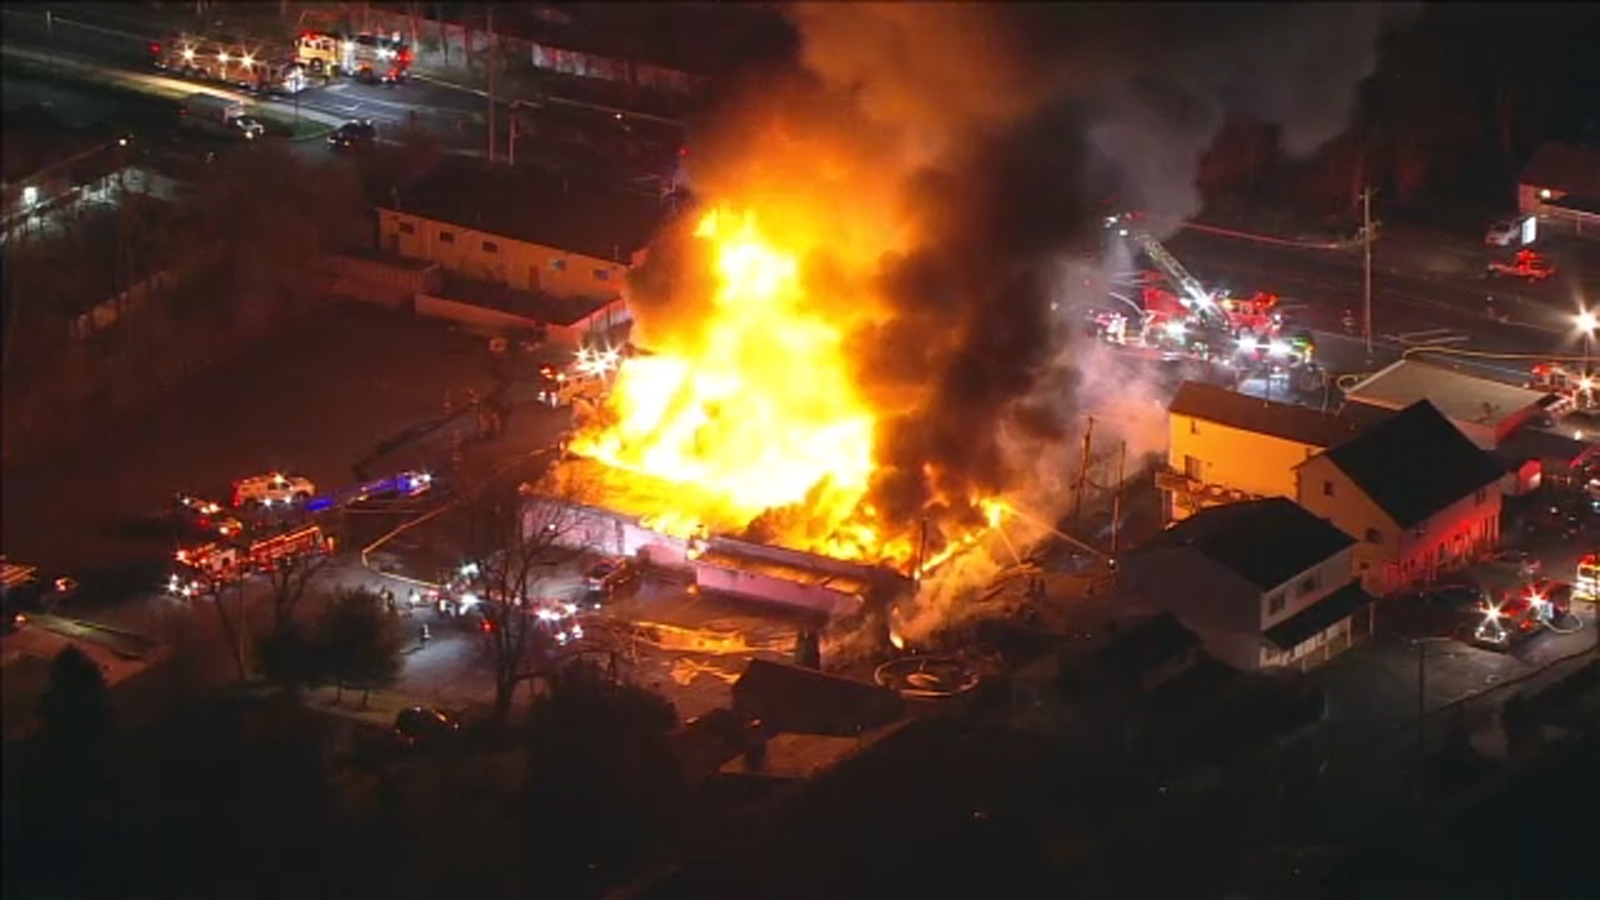 Massive 3-alarm fire destroys Levittown Lanes bowling alley in Bucks County